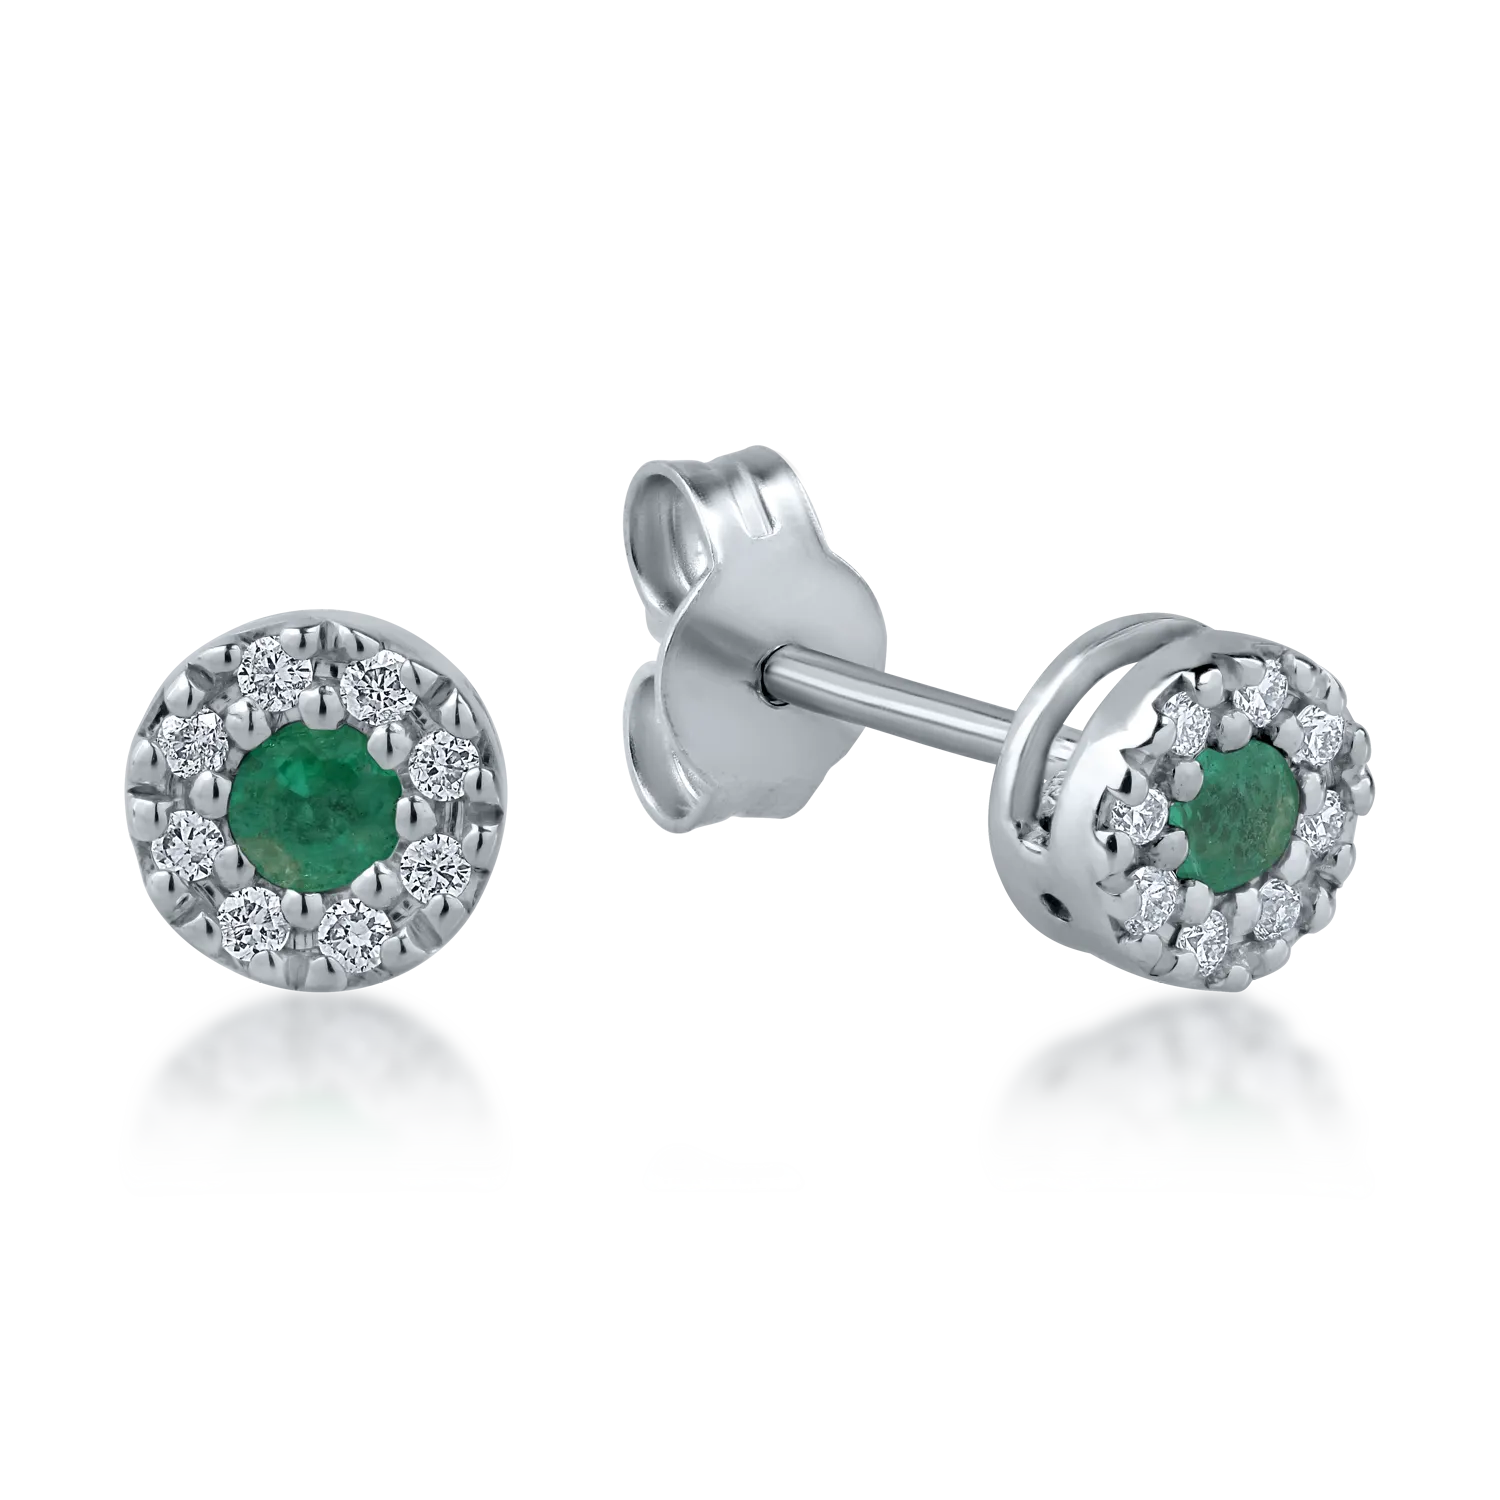 White gold earrings with 0.13ct emeralds and 0.09ct diamonds